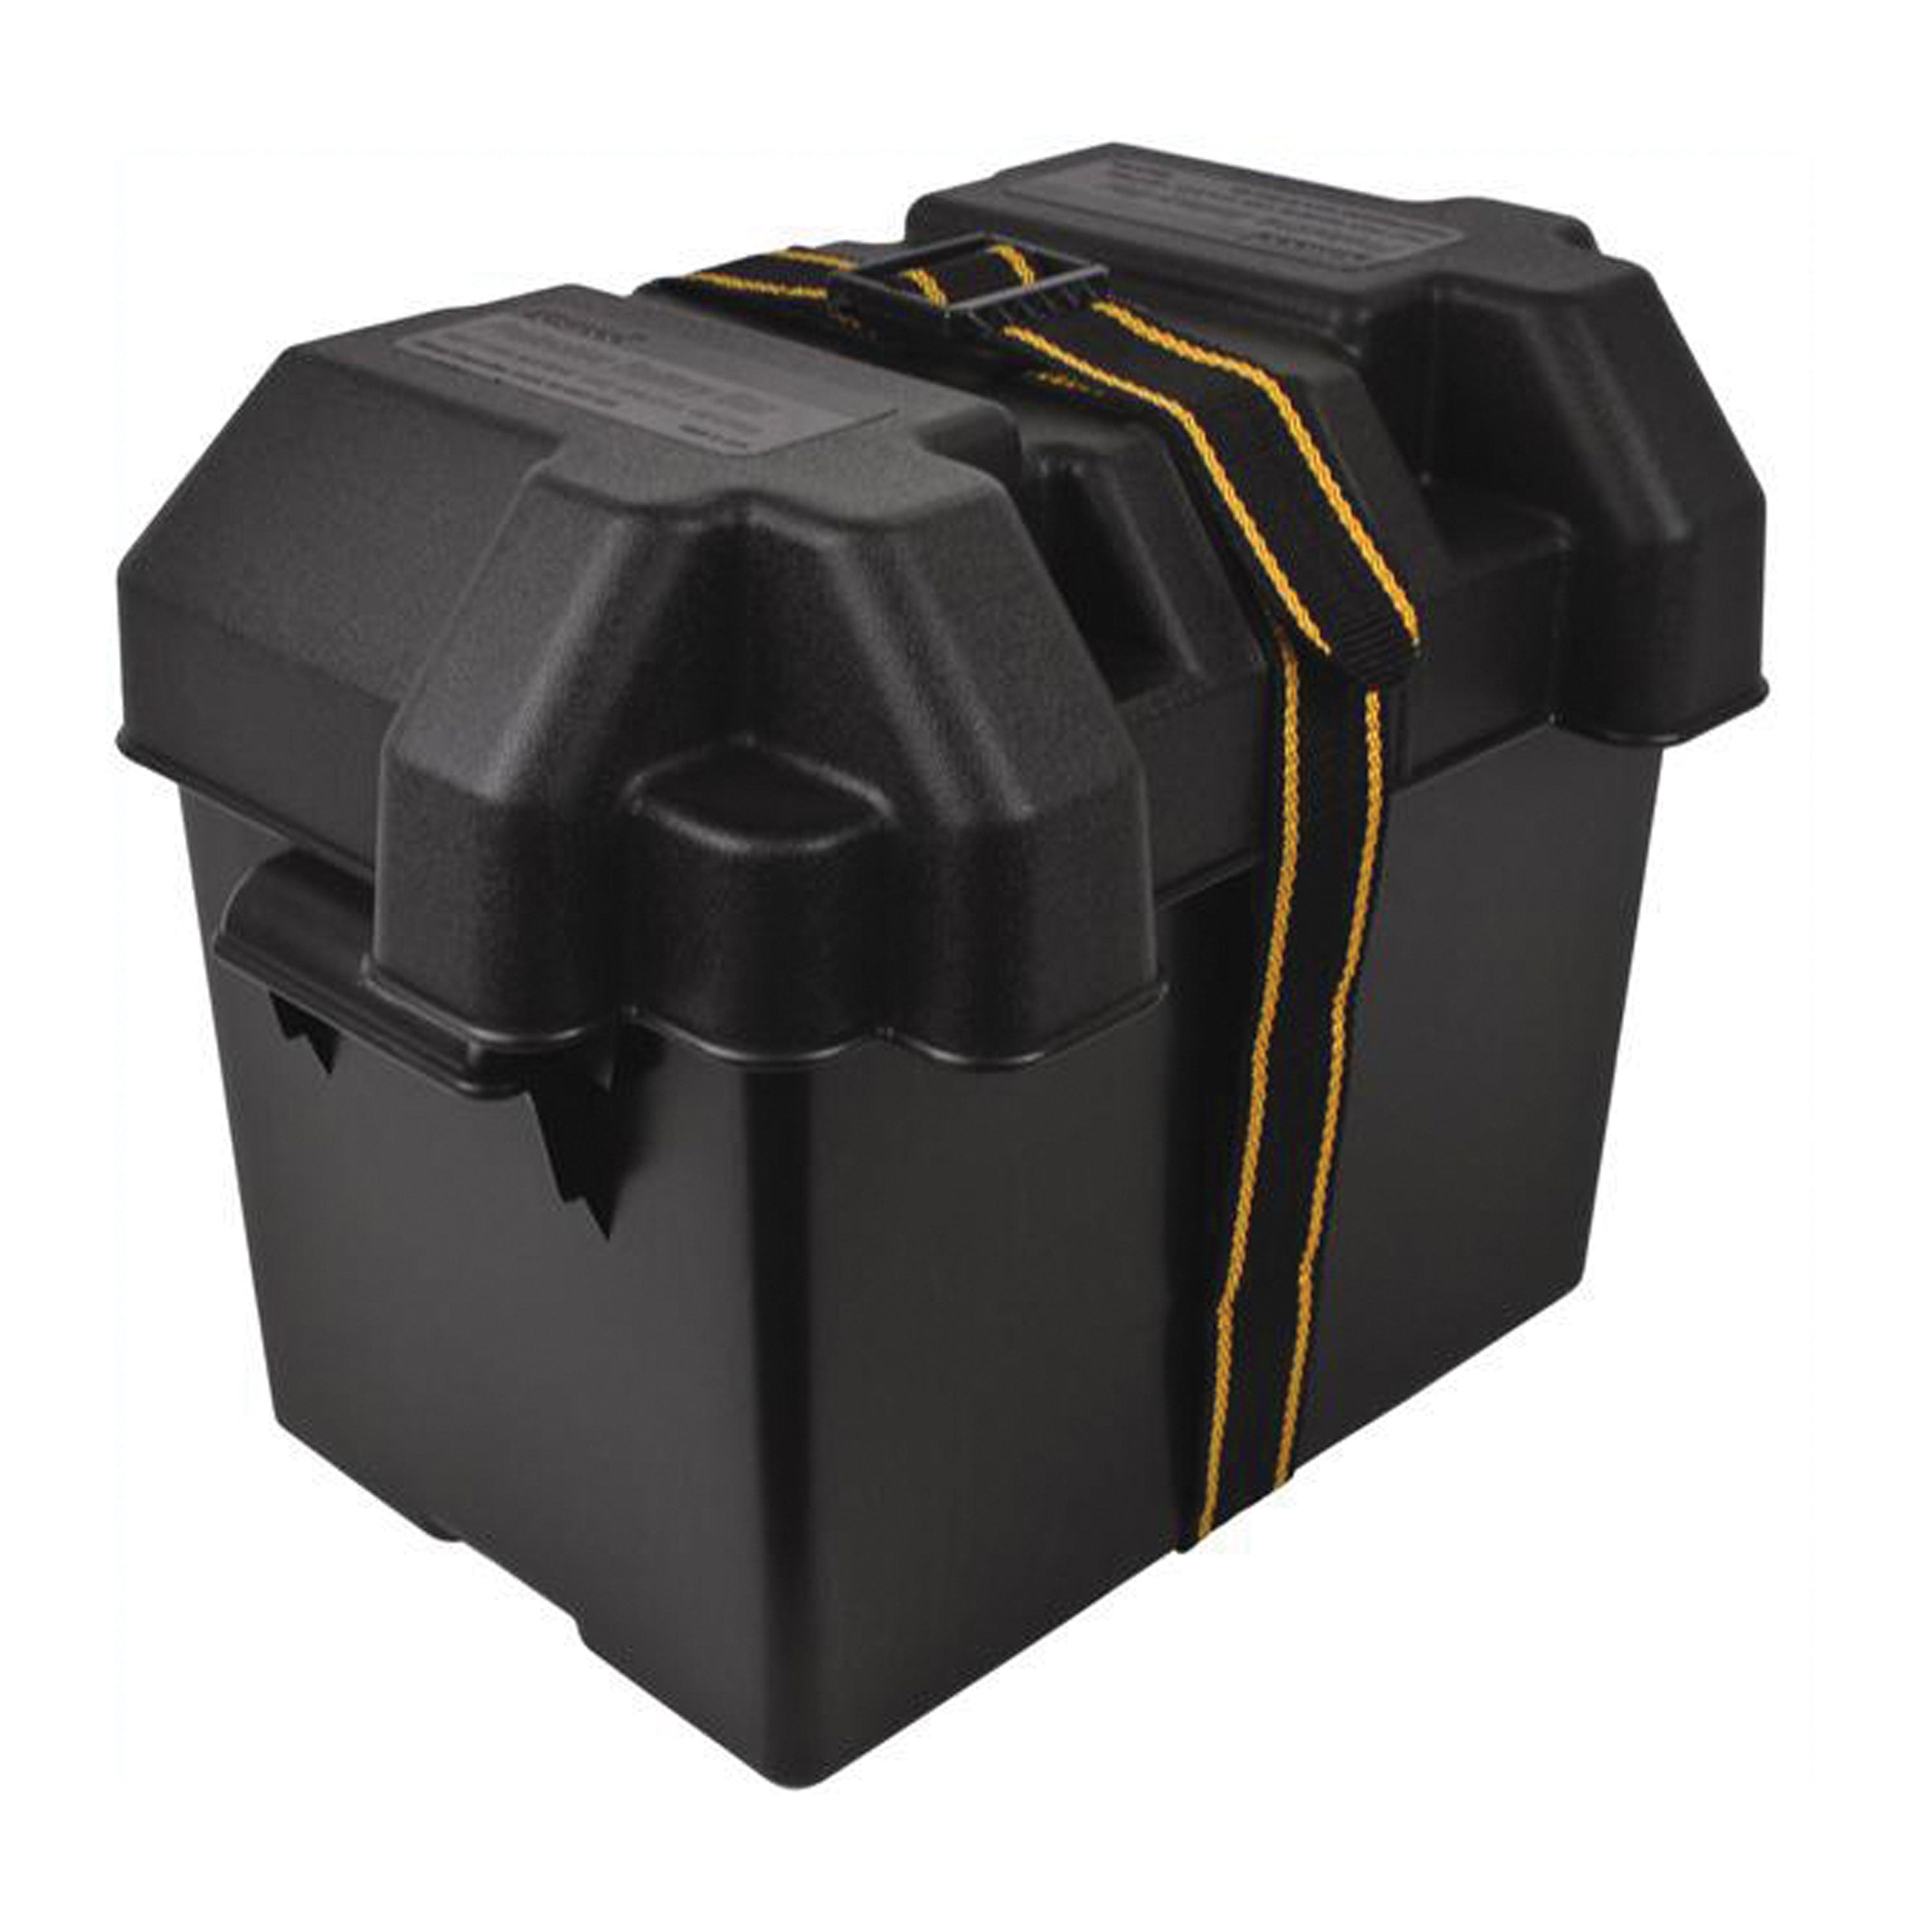 Attwood 9069-1 Standard Battery Box - 24 Series, Non-Vented